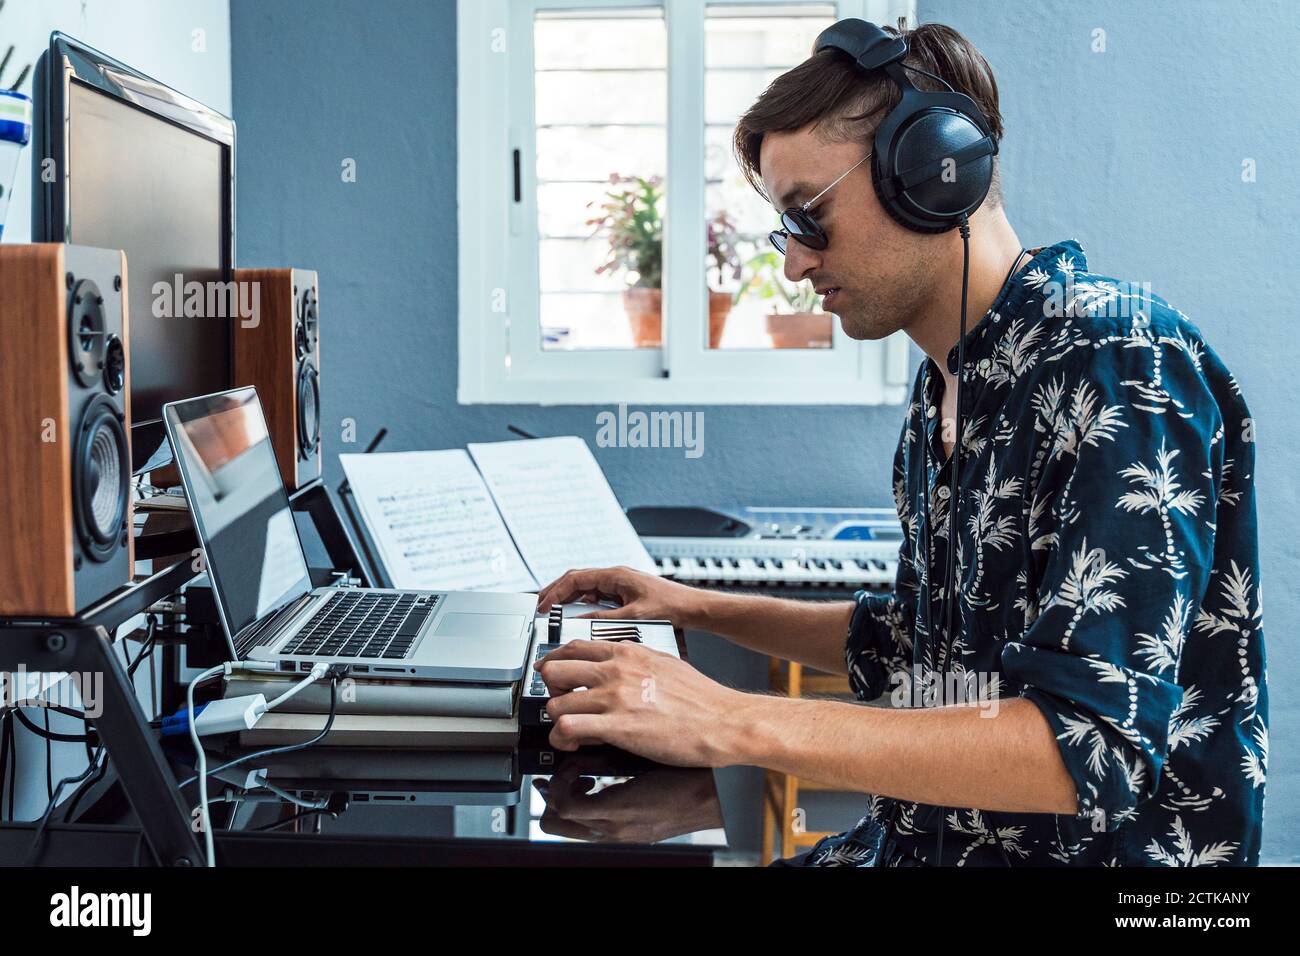 Man with headphones using laptop and keyboard at home Stock Photo